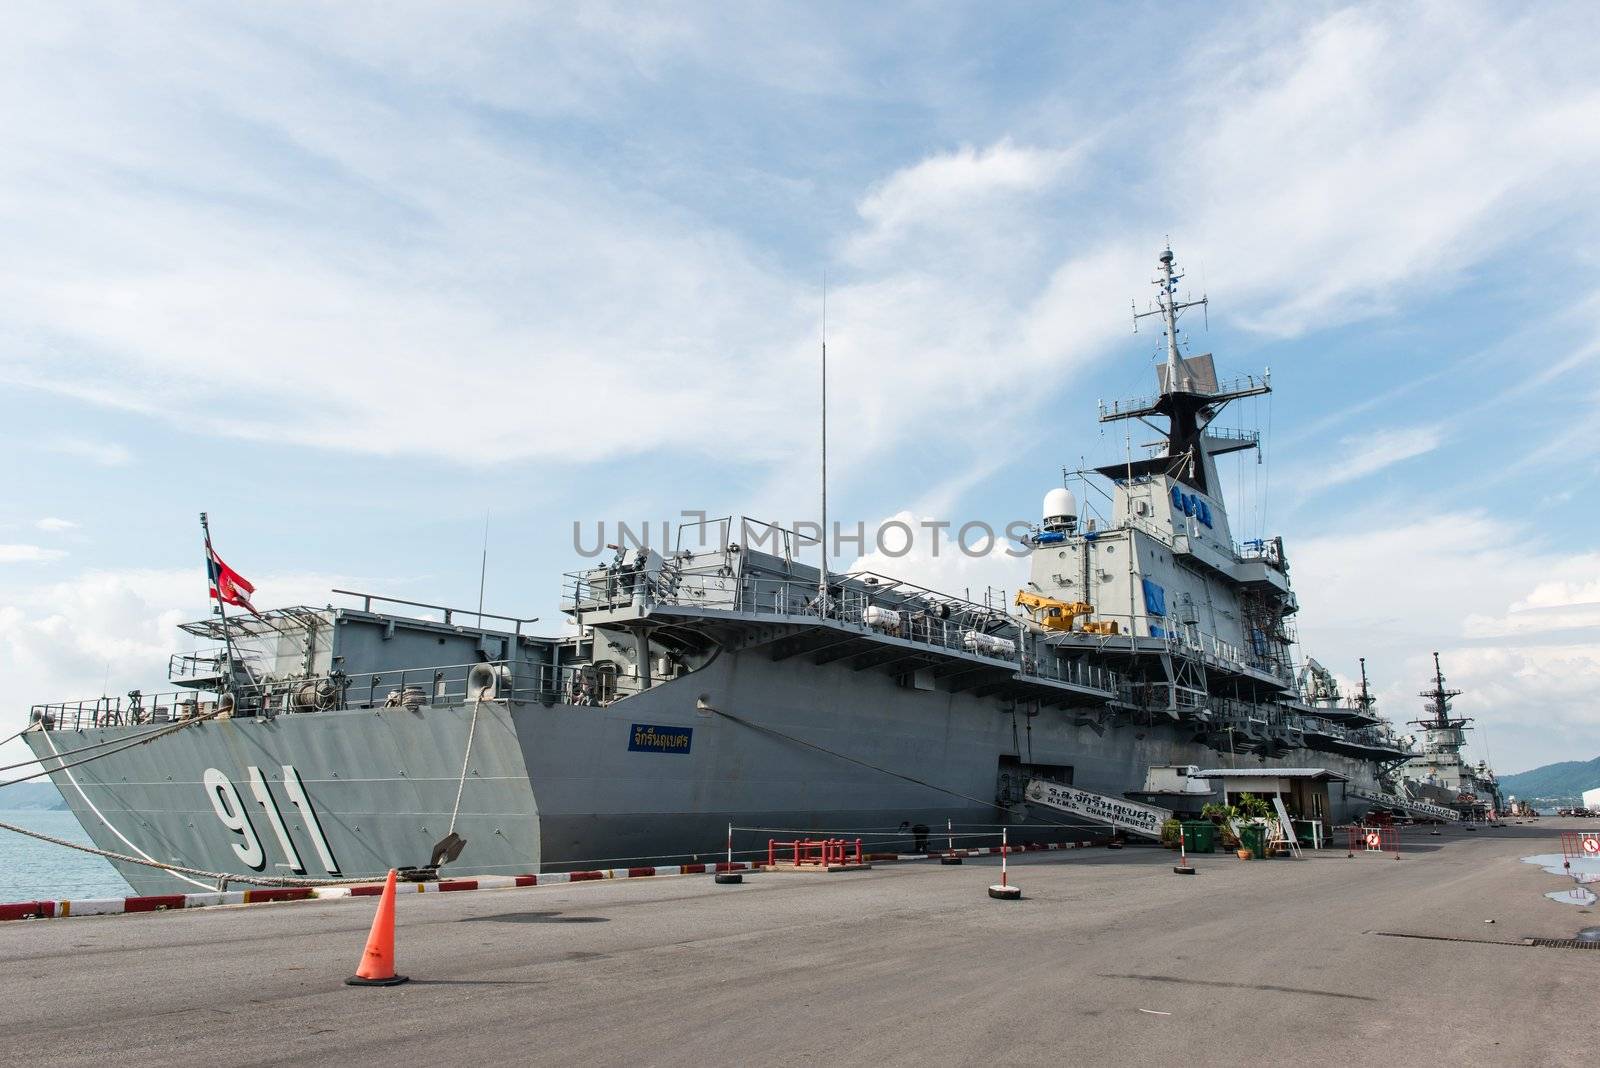 Large battle ship in Naval base by sasilsolutions